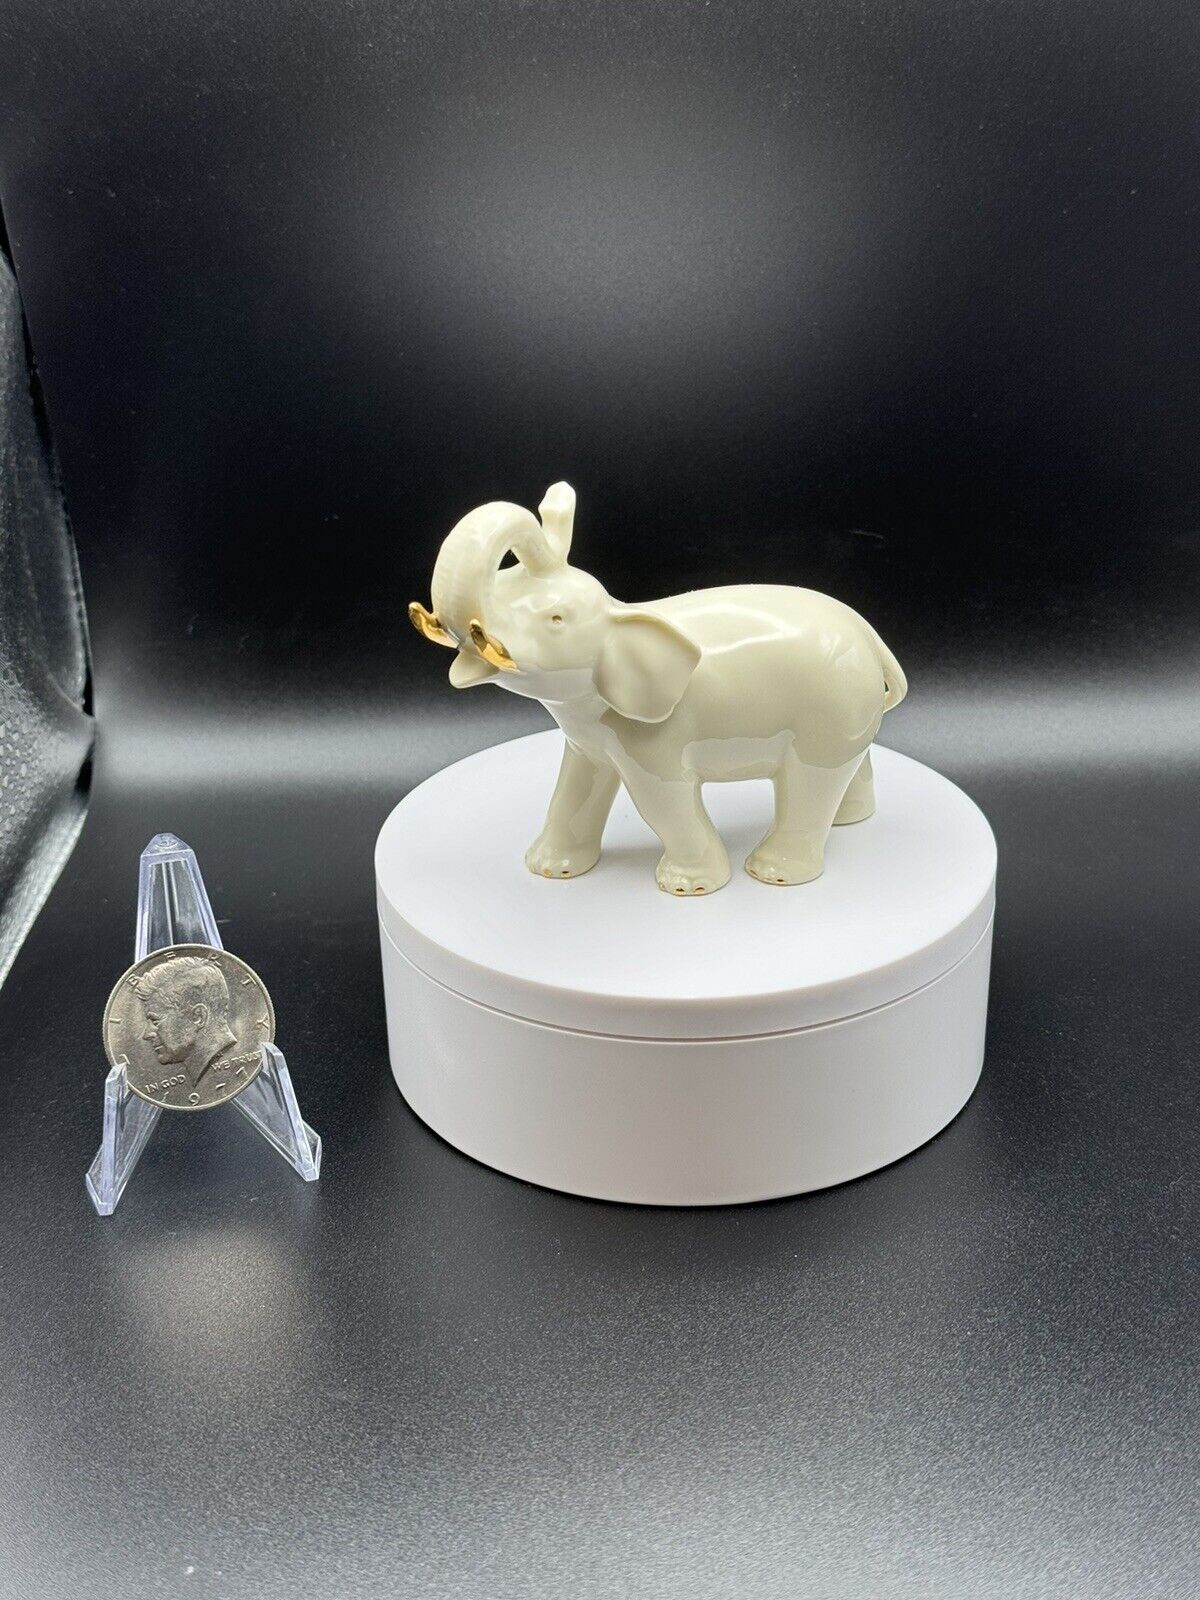 Lenox Elephant Handcrafted In Malaysia - White Porcelain With Gold Trim